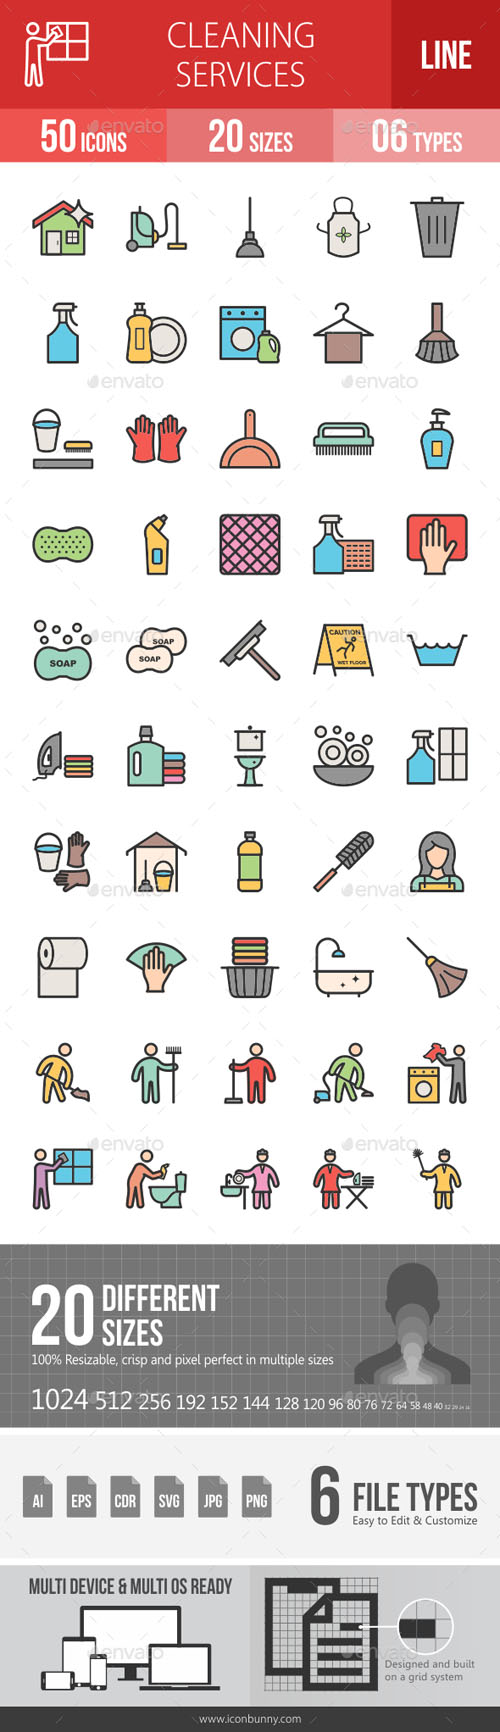 GR - Cleaning Services Line Filled Icons 19267741